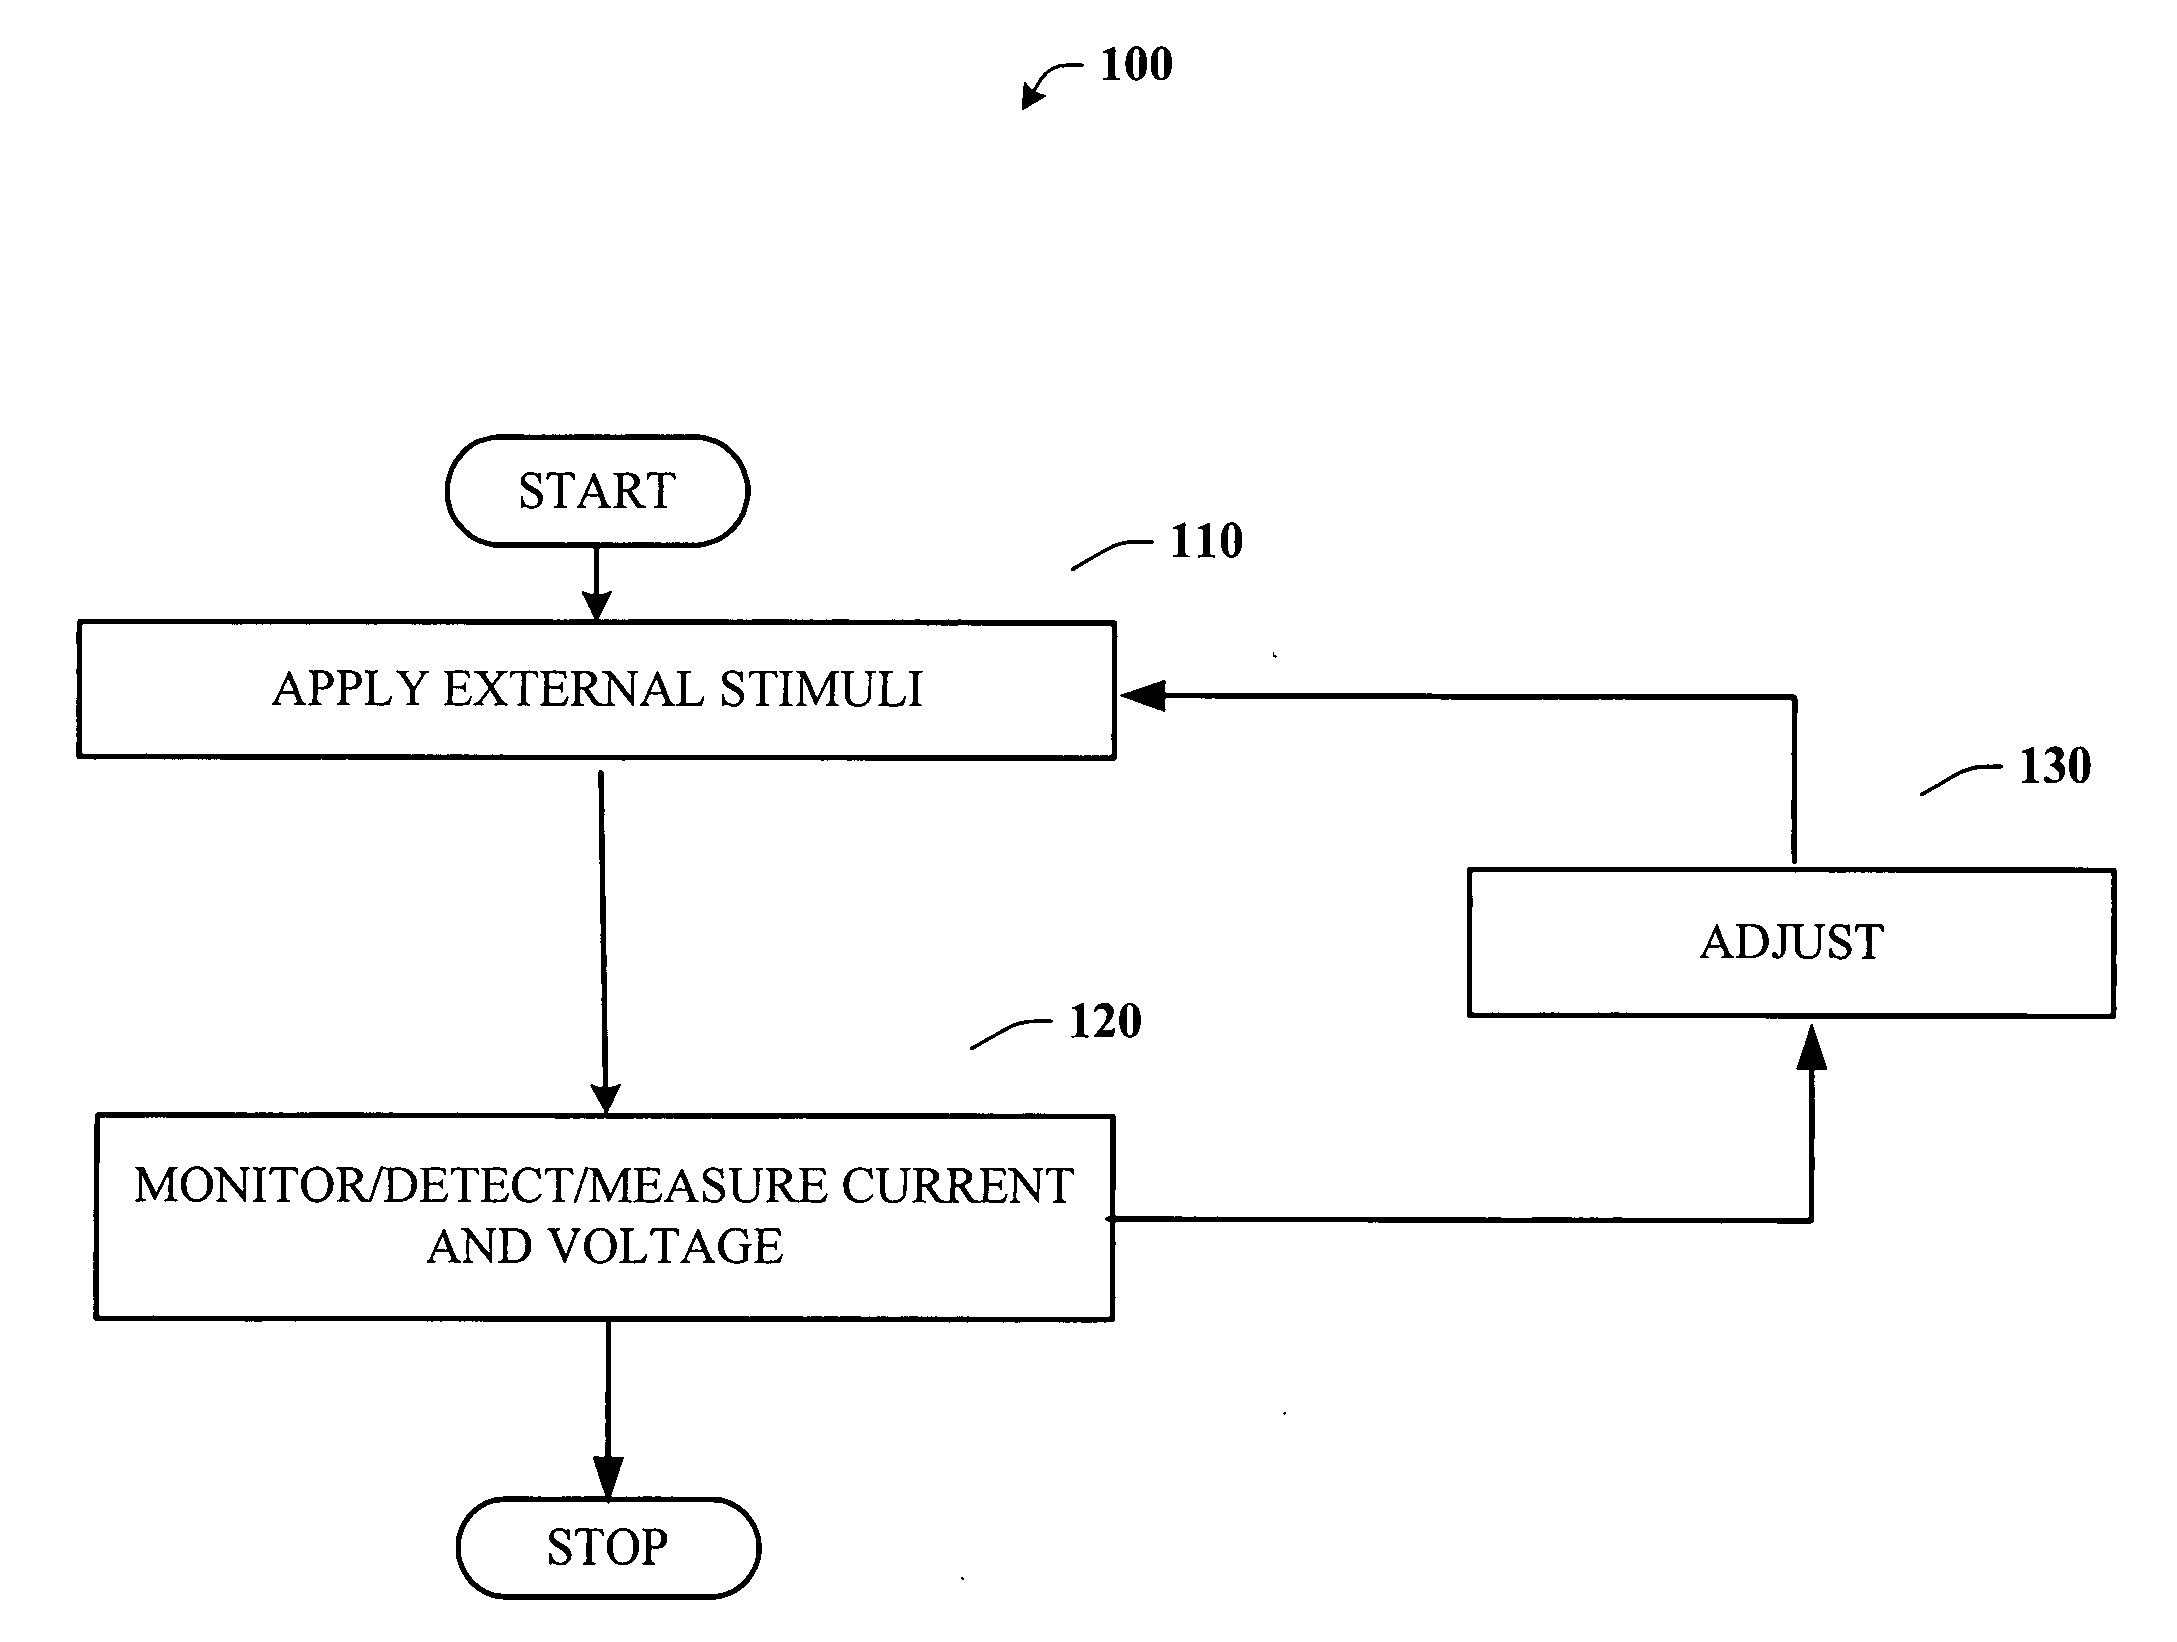 Program/erase waveshaping control to increase data retention of a memory cell